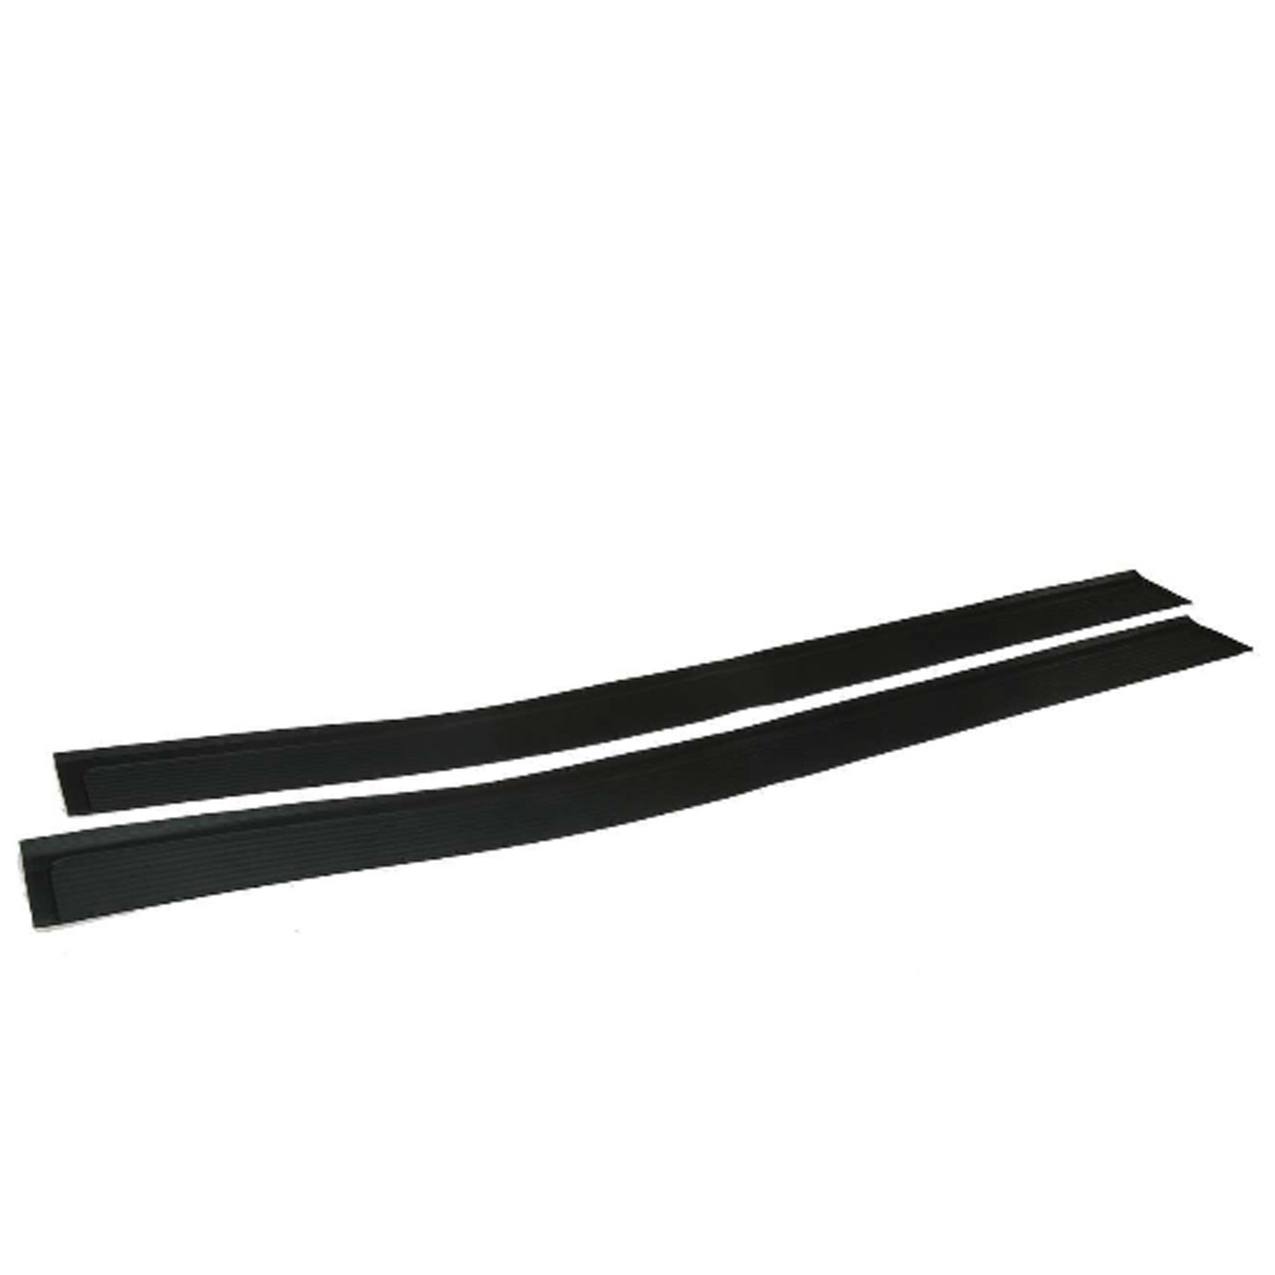 Mercedes Door Sill Strip - Driver and Passenger Side - URO Parts 1076860180